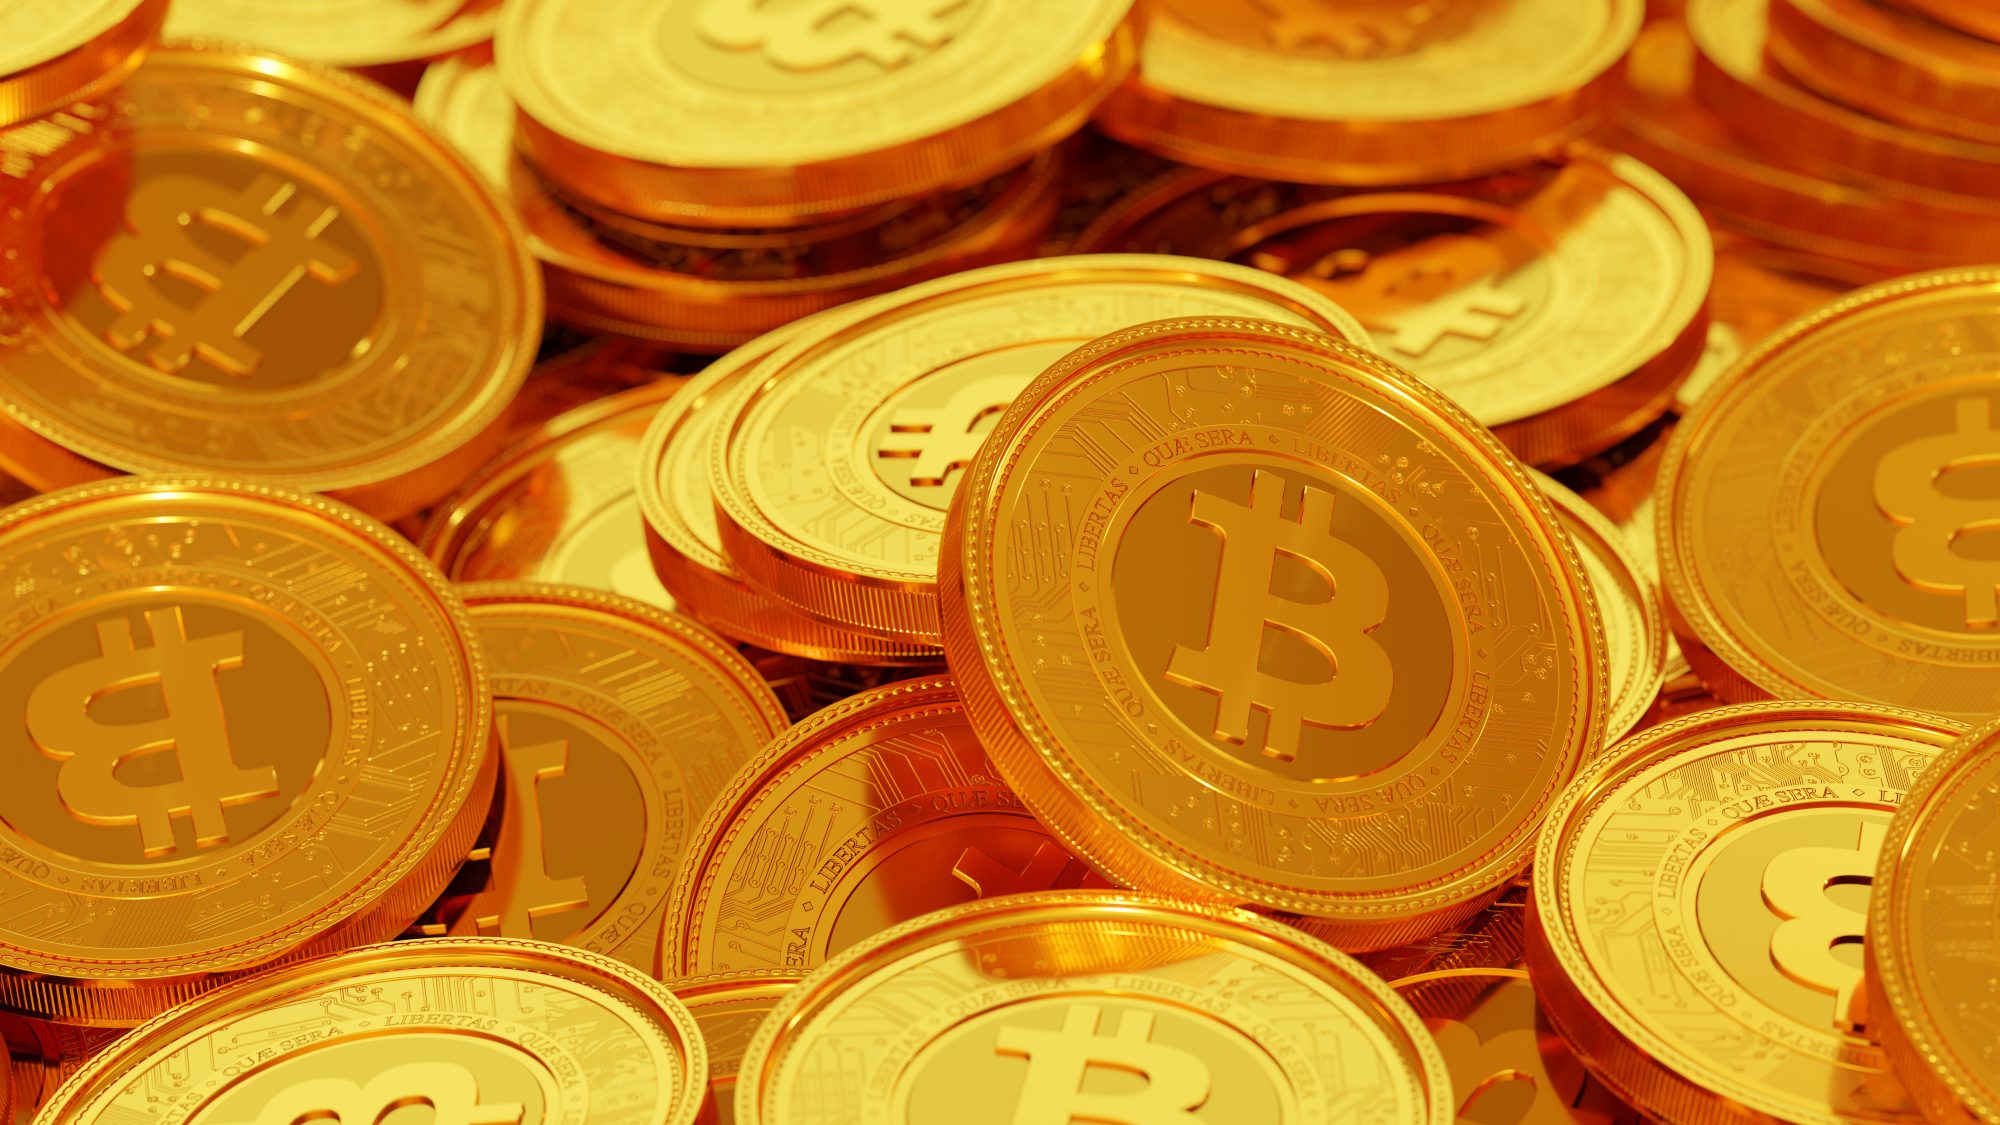 Pile of gold bitcoins cryptocurrency